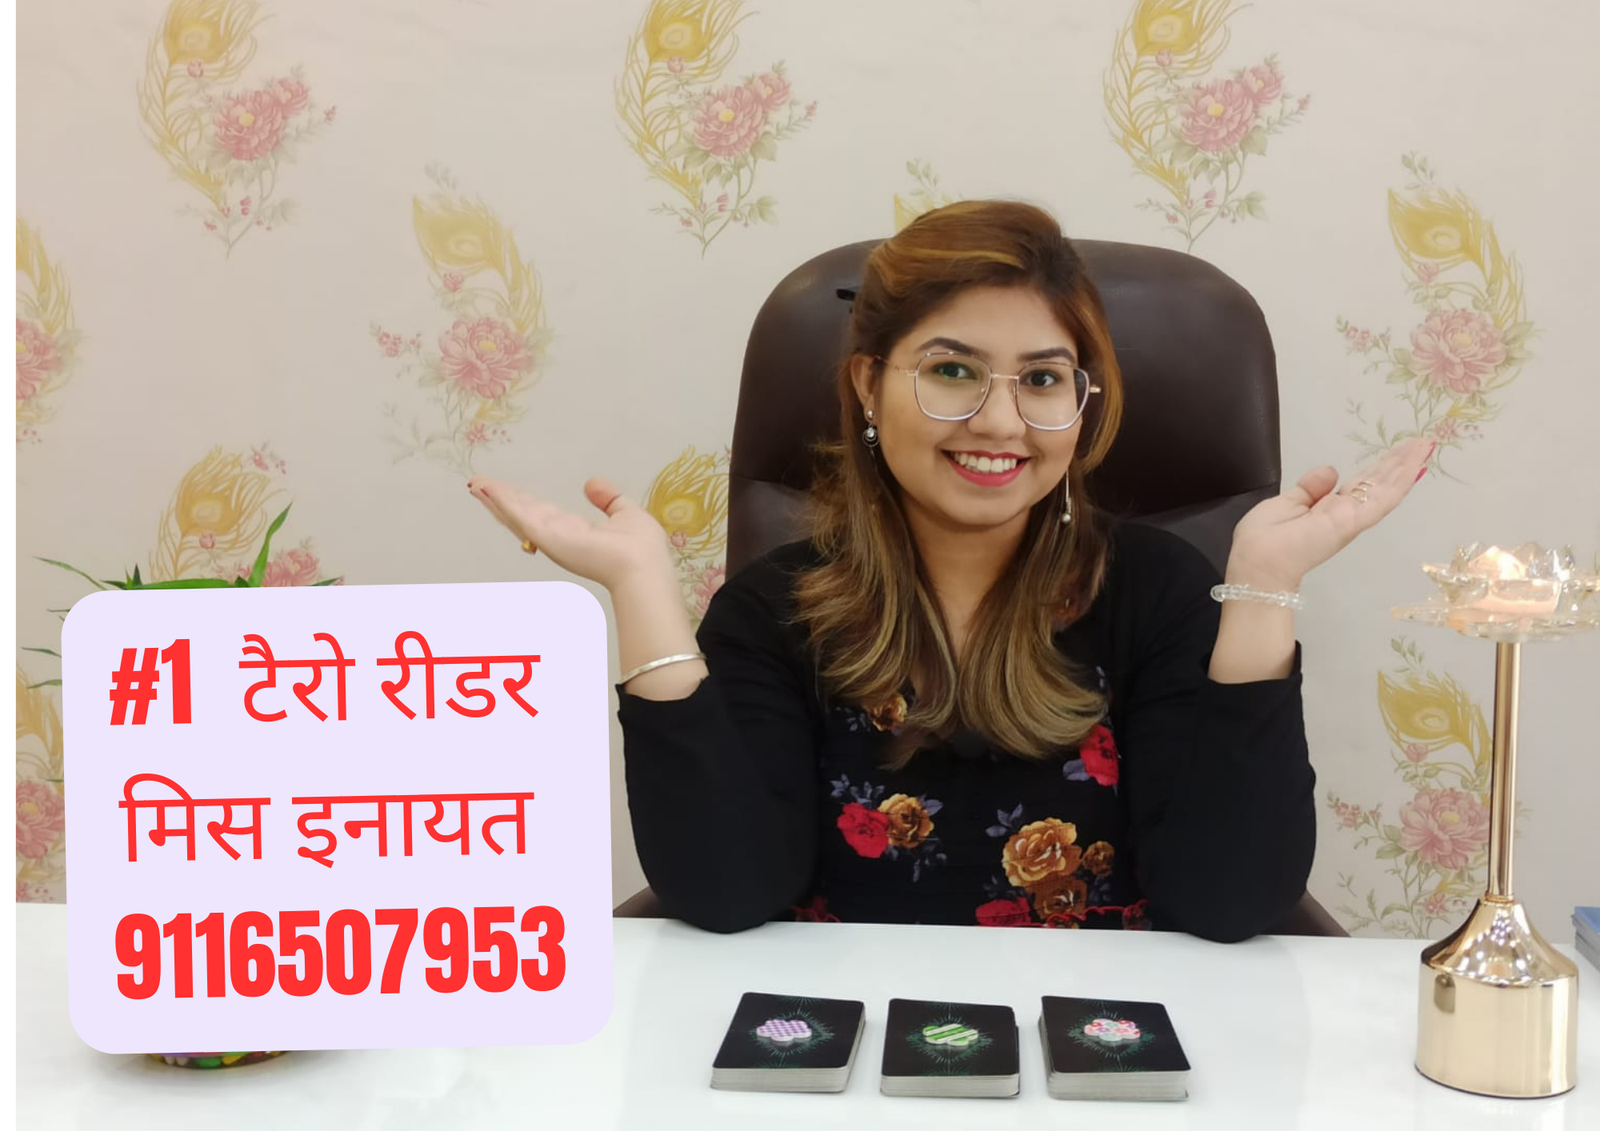 Learn and Earn by Tarot Card Reading